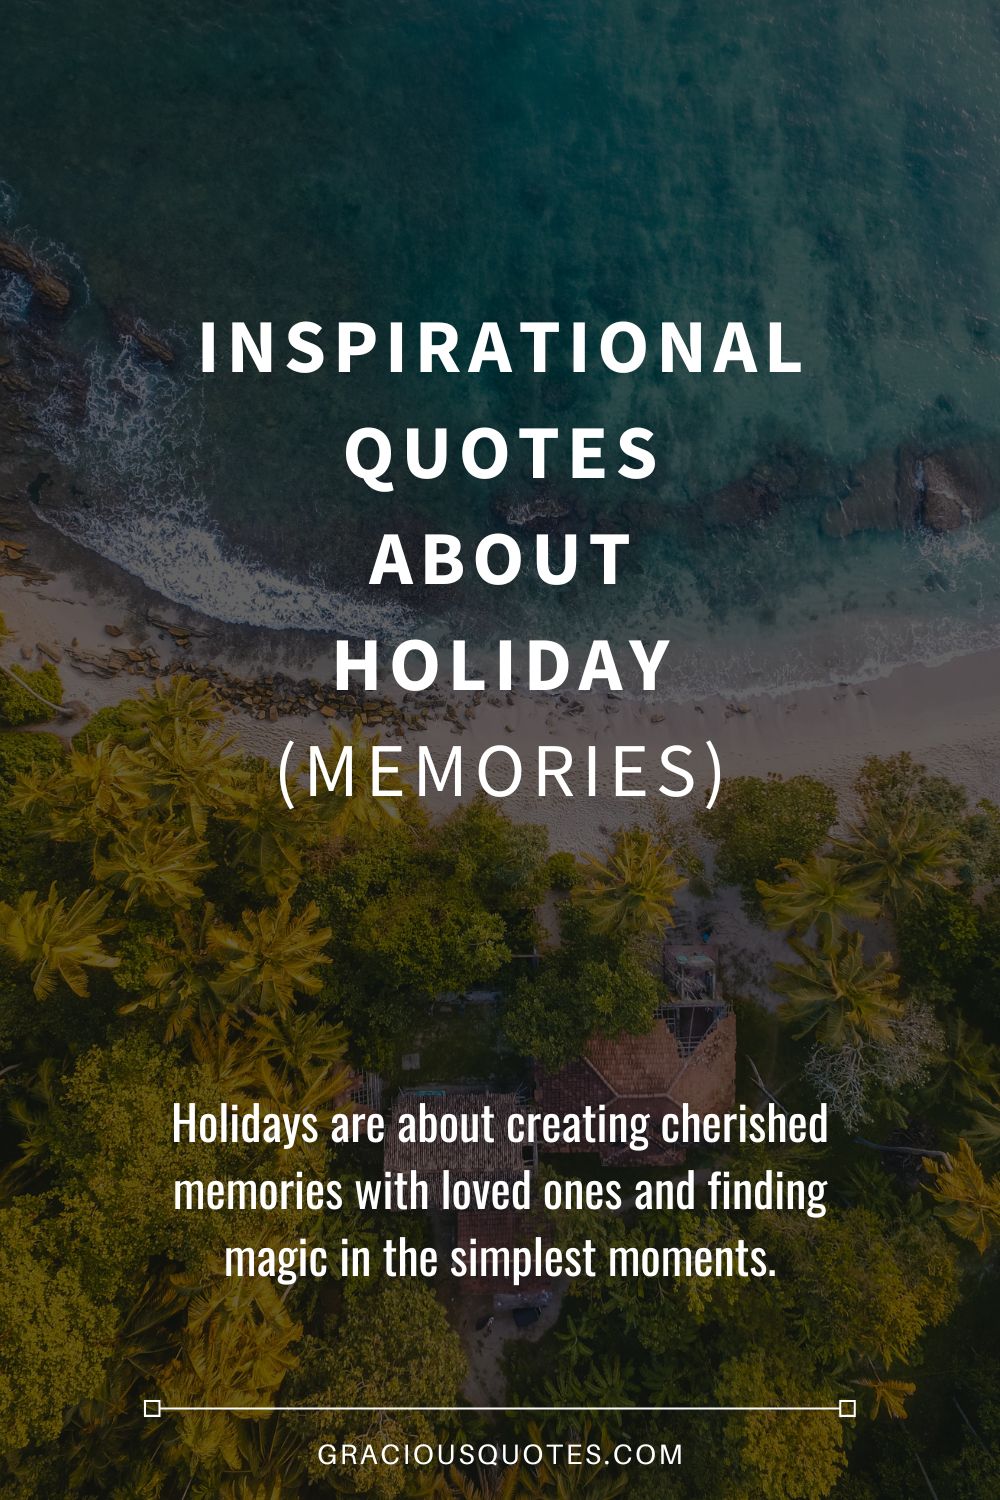 Inspirational Quotes About Holiday (MEMORIES) - Gracious Quotes